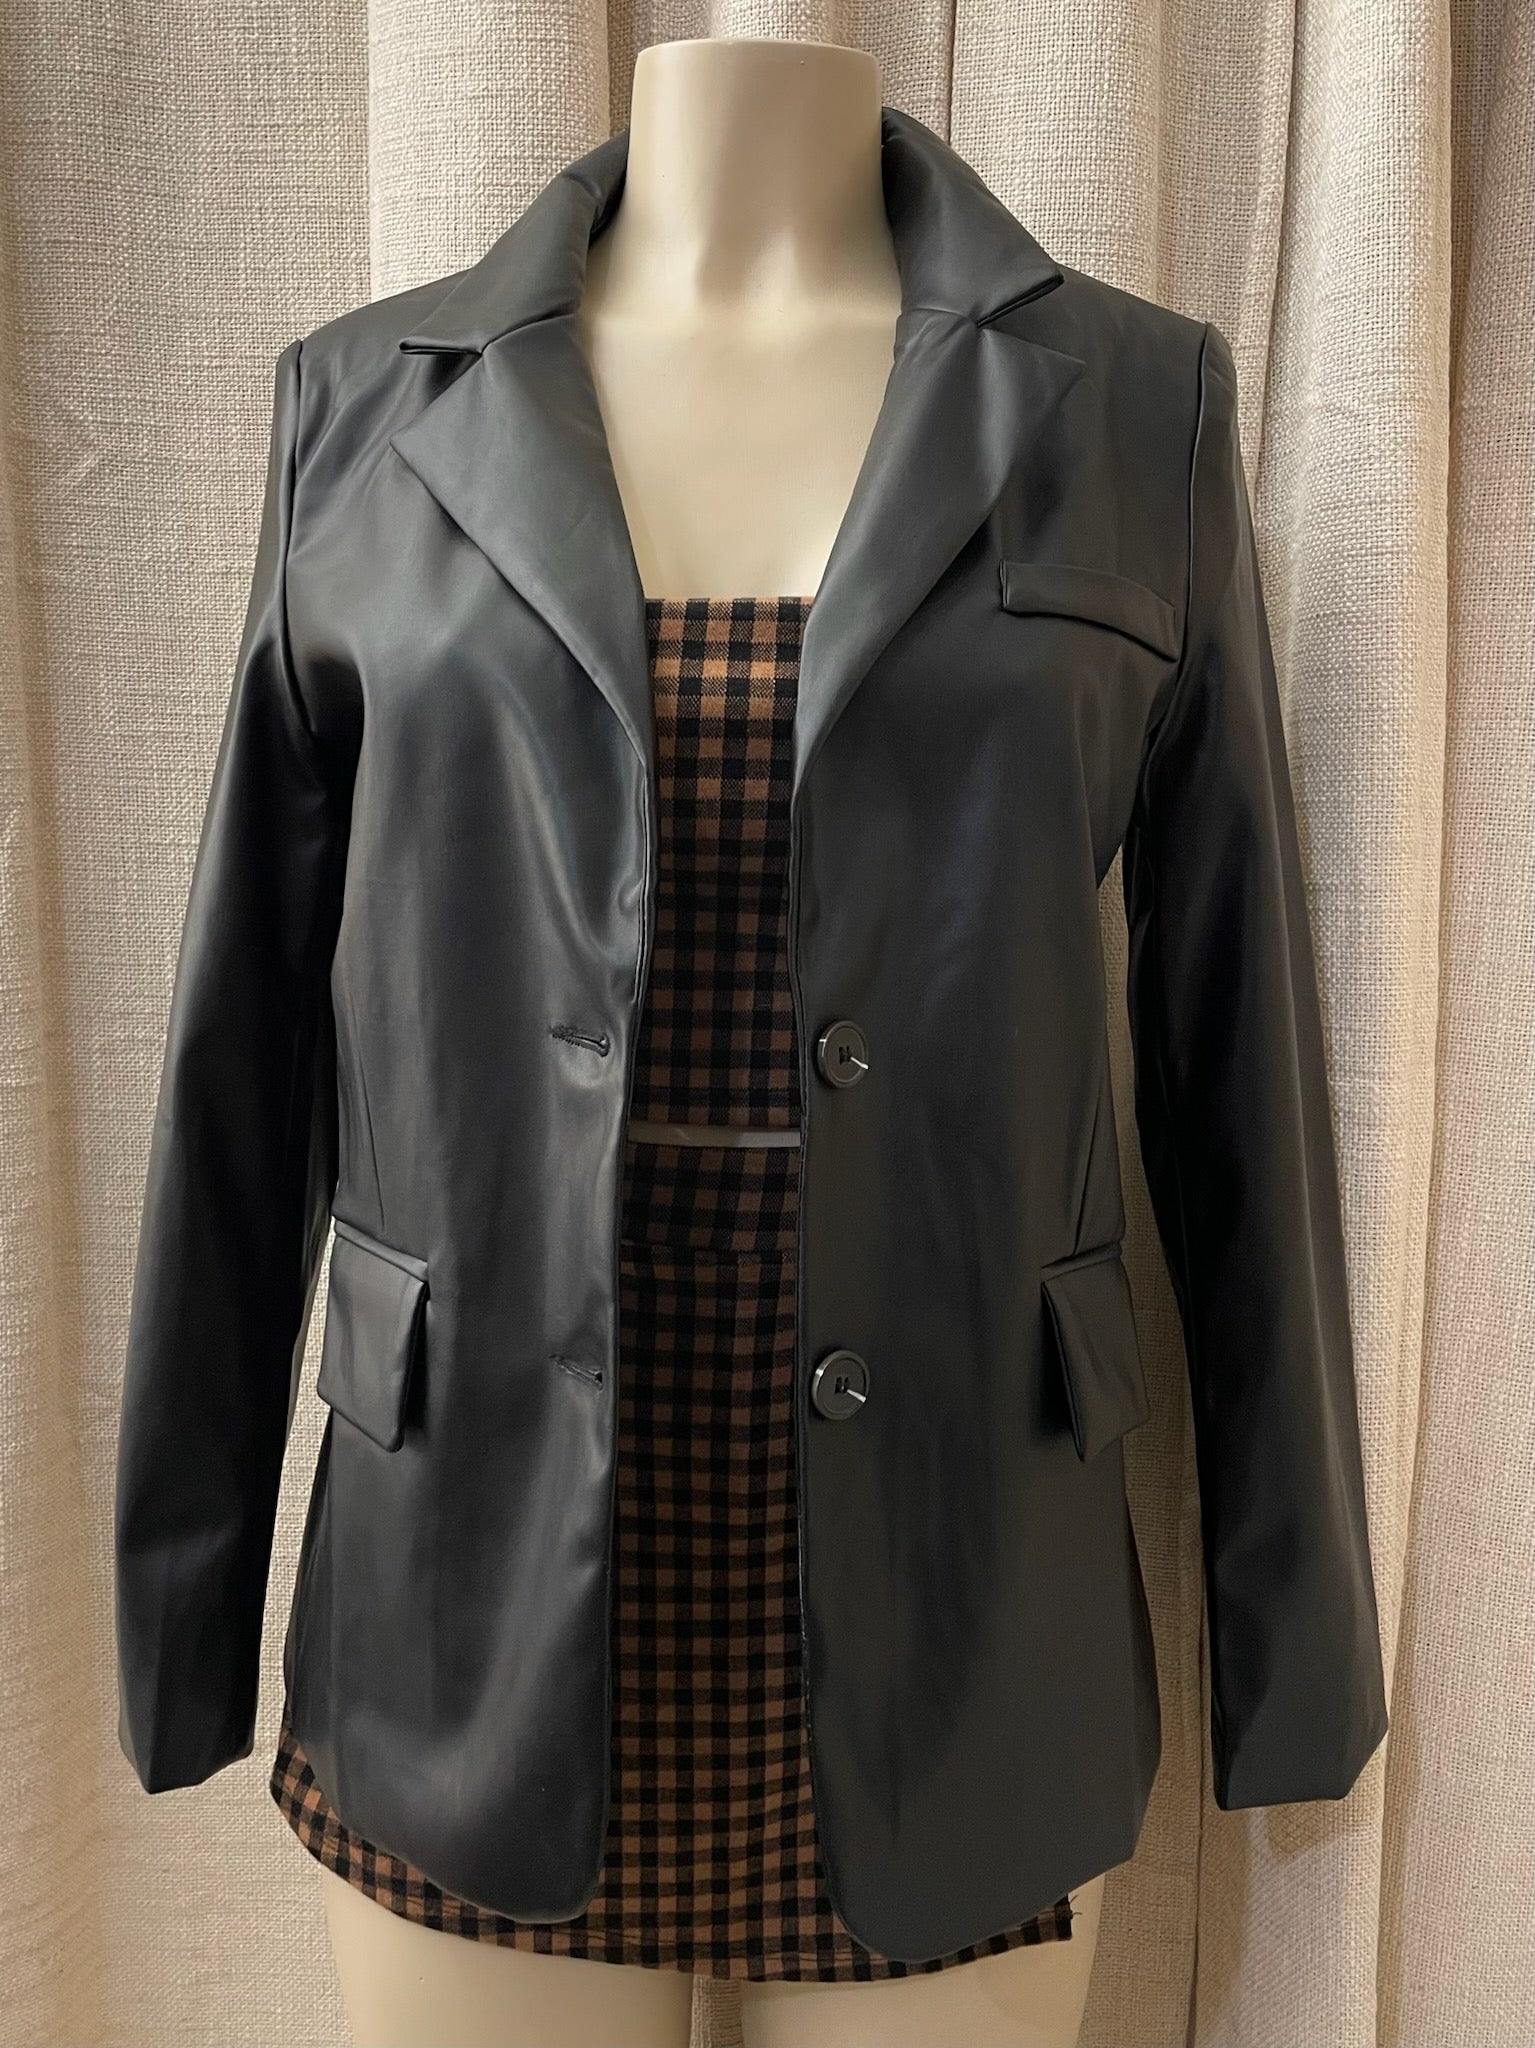 The “Booked & Busy” Faux Leather Jackey